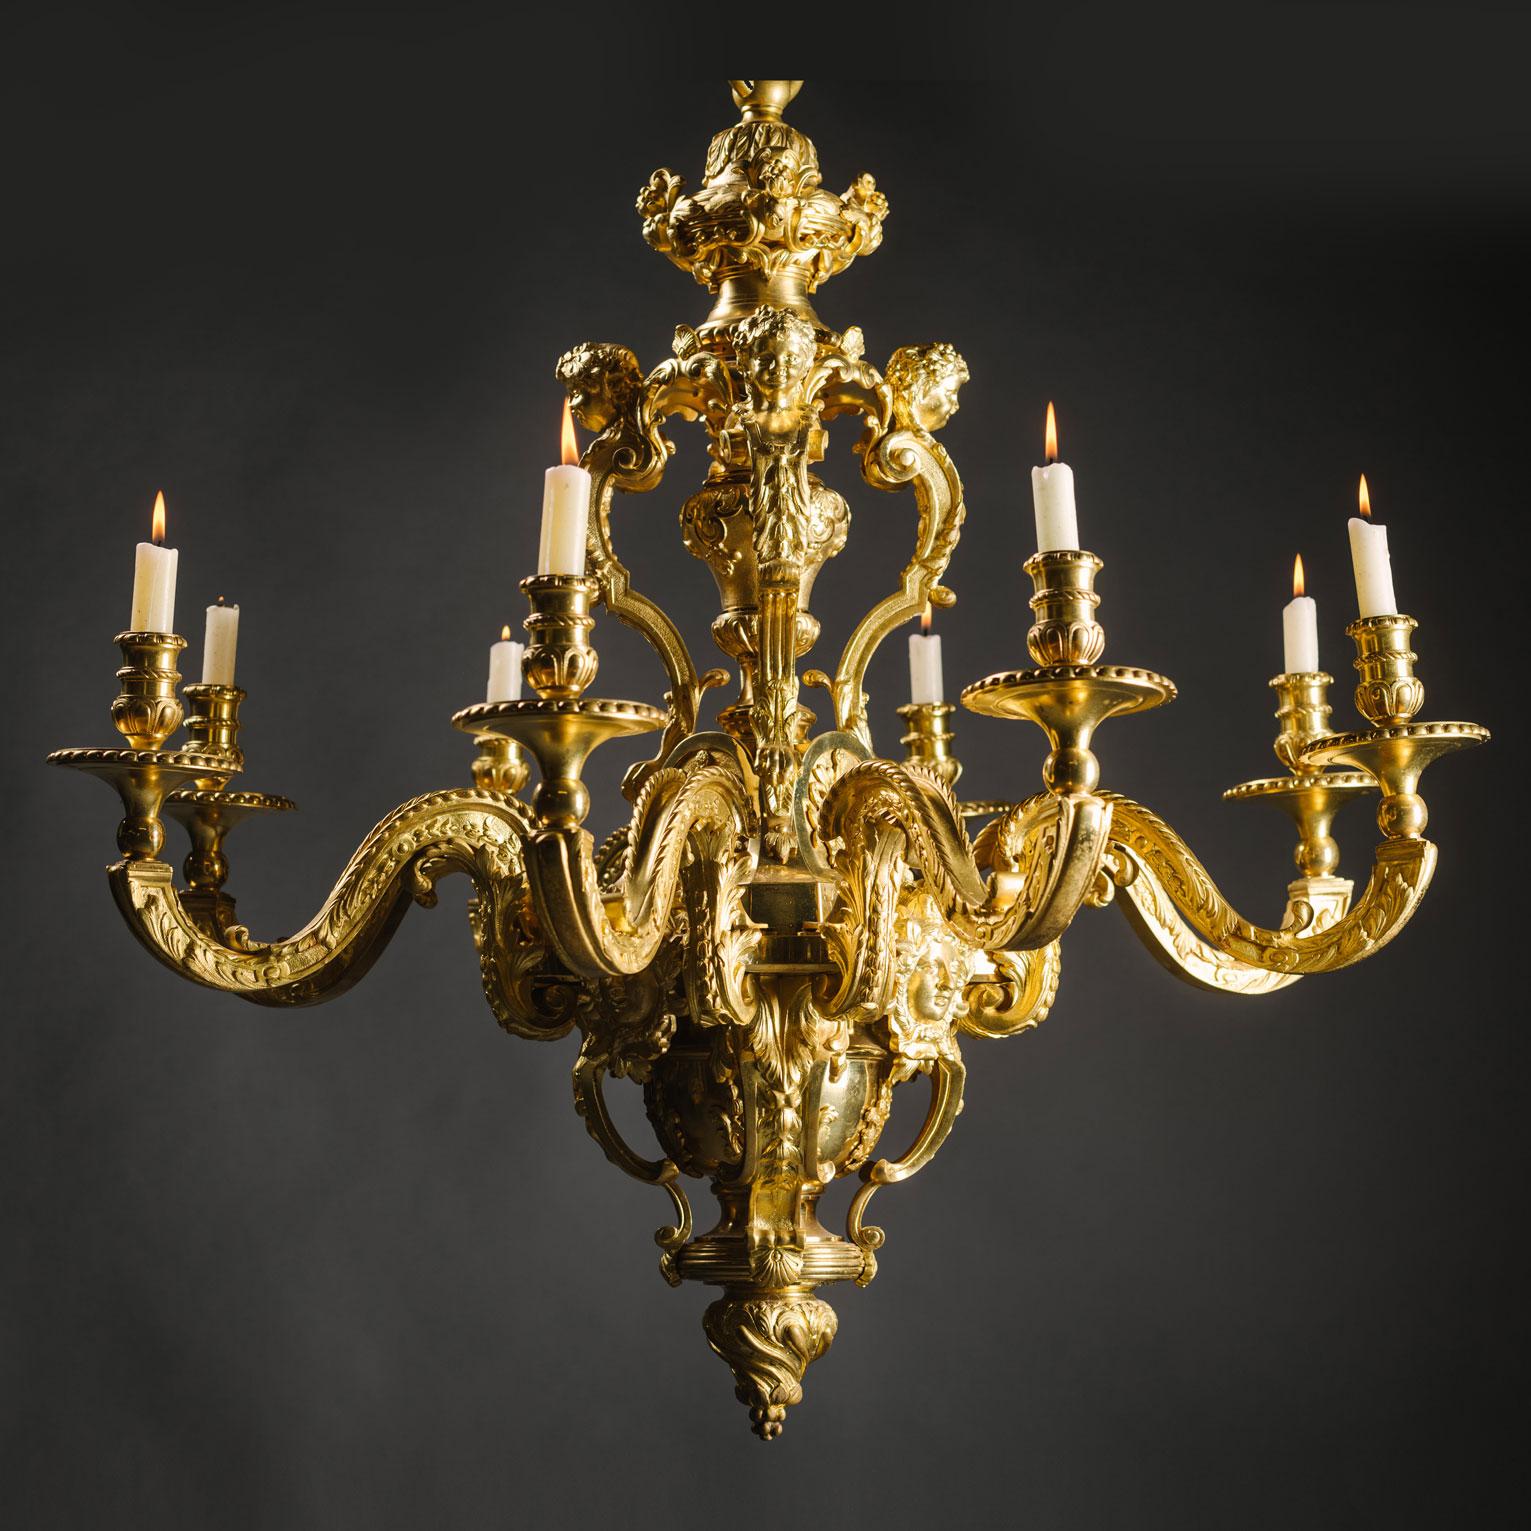 A fine Napoleon III ormolu eight-light chandelier, after the Model by André-Charles Boulle.

This well-cast Louis XIV style chandelier is after an important model attributed to Andre-Charles Boulle, in the collection of the Musee du Louvre (OA